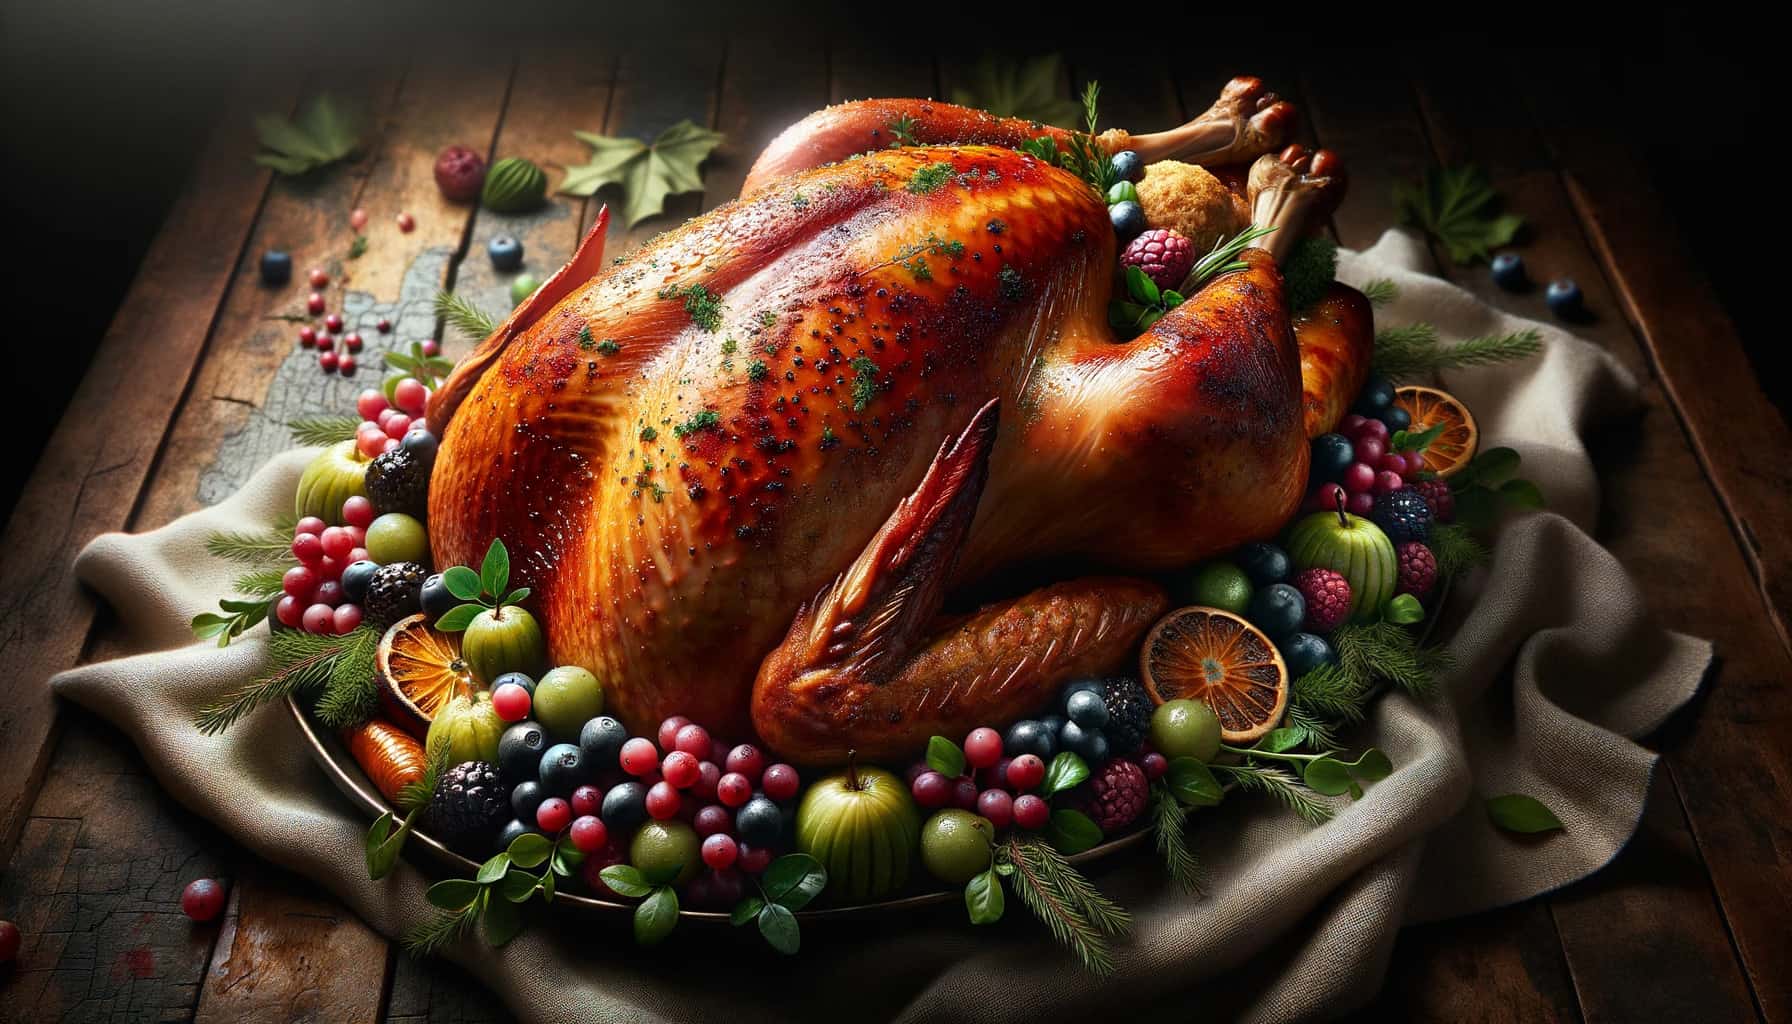 Peru de natal, garnished with fresh herbs and fruits, set against a rustic backdrop. The roast turkey's skin is beautifully golden, with hints of the farofa stuffing visible.